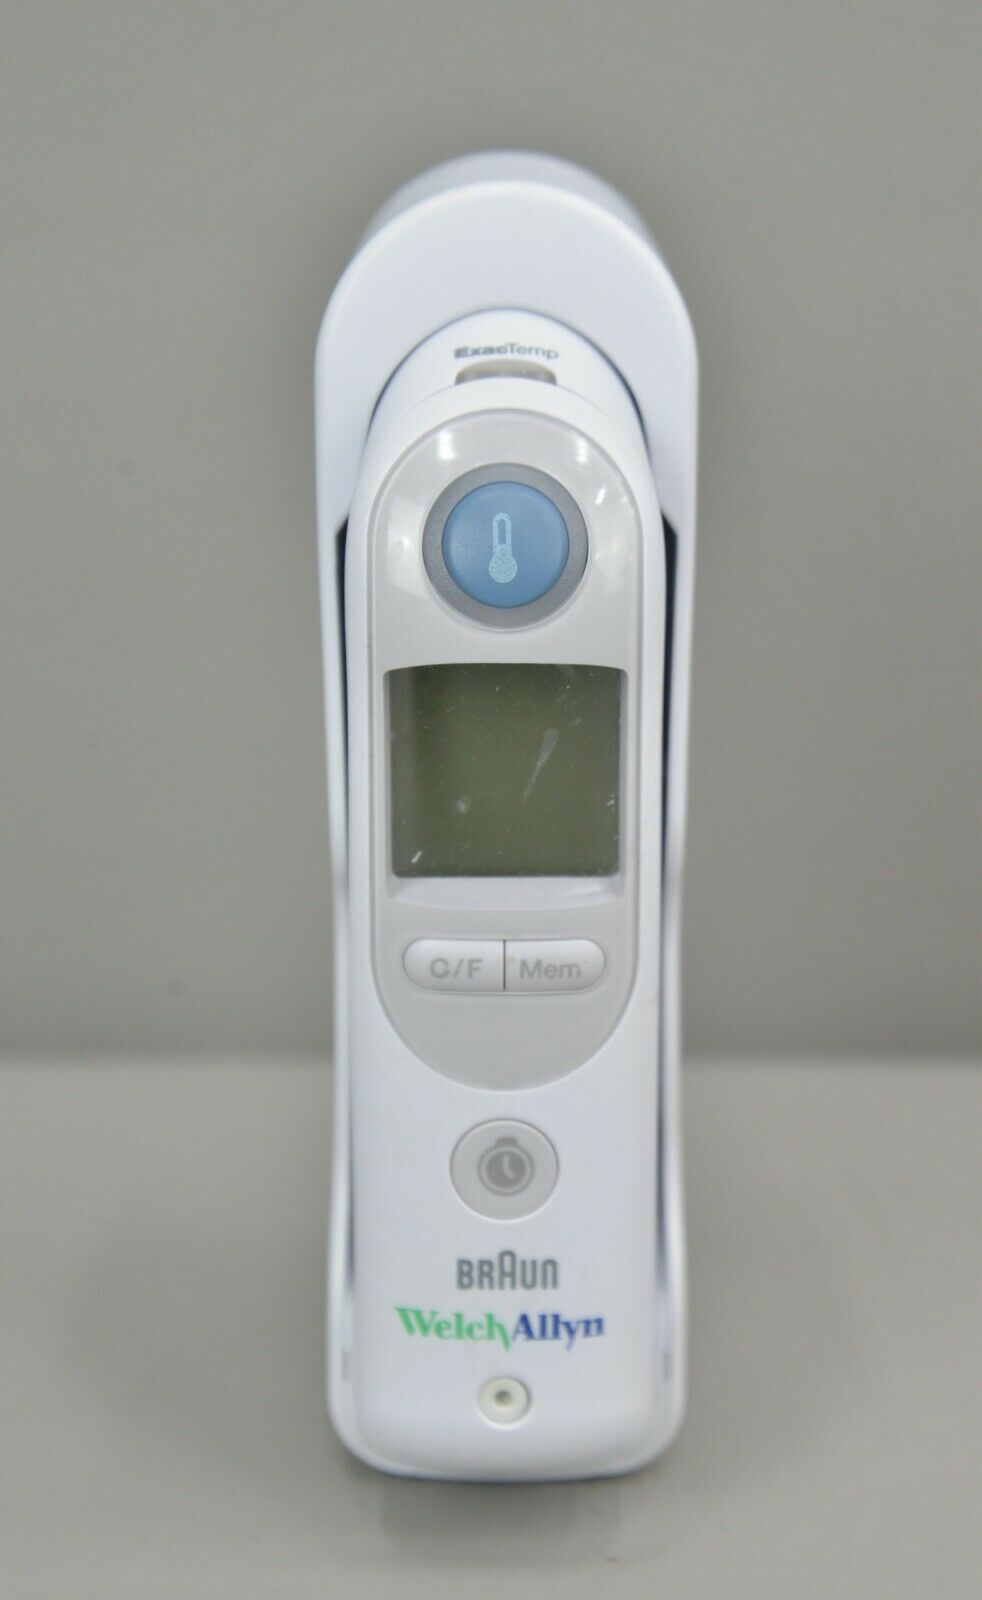 Welch Allyn Braun ThermoScan Pro 6000 Ear Thermometer REF 901054